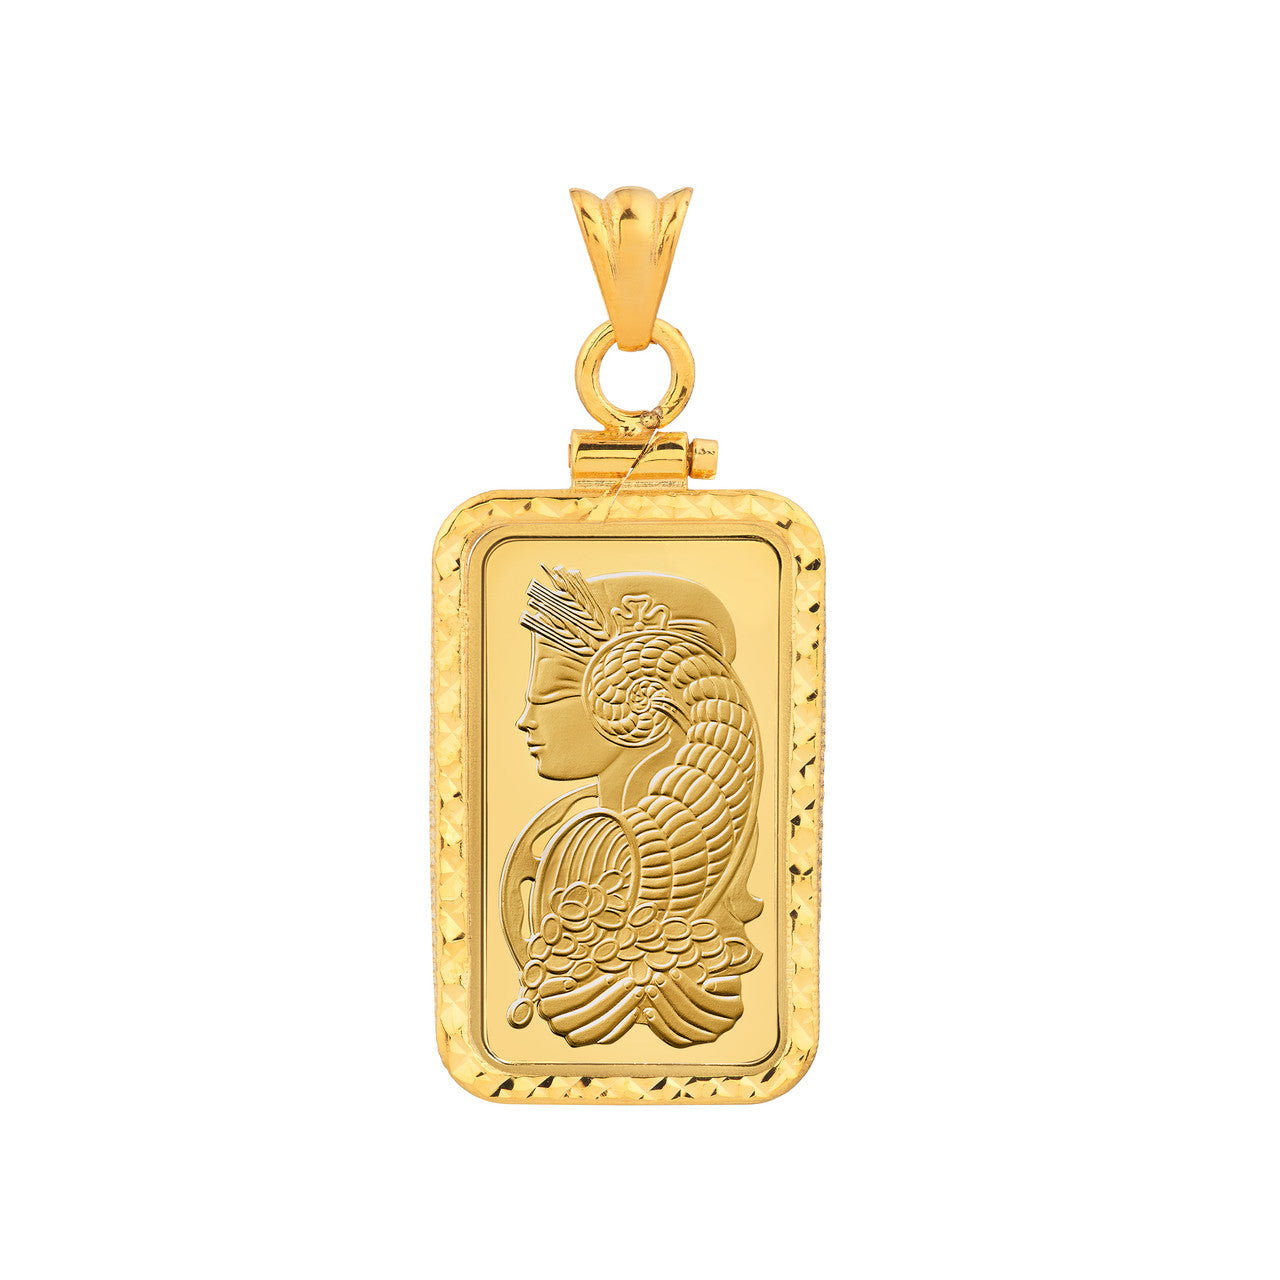 14K Yellow Gold Pamp Suisse Lady Fortuna 10 gram Bar Coin Bezel Diamond Cut Screw Top Frame Mounting Holder Pendant Charm